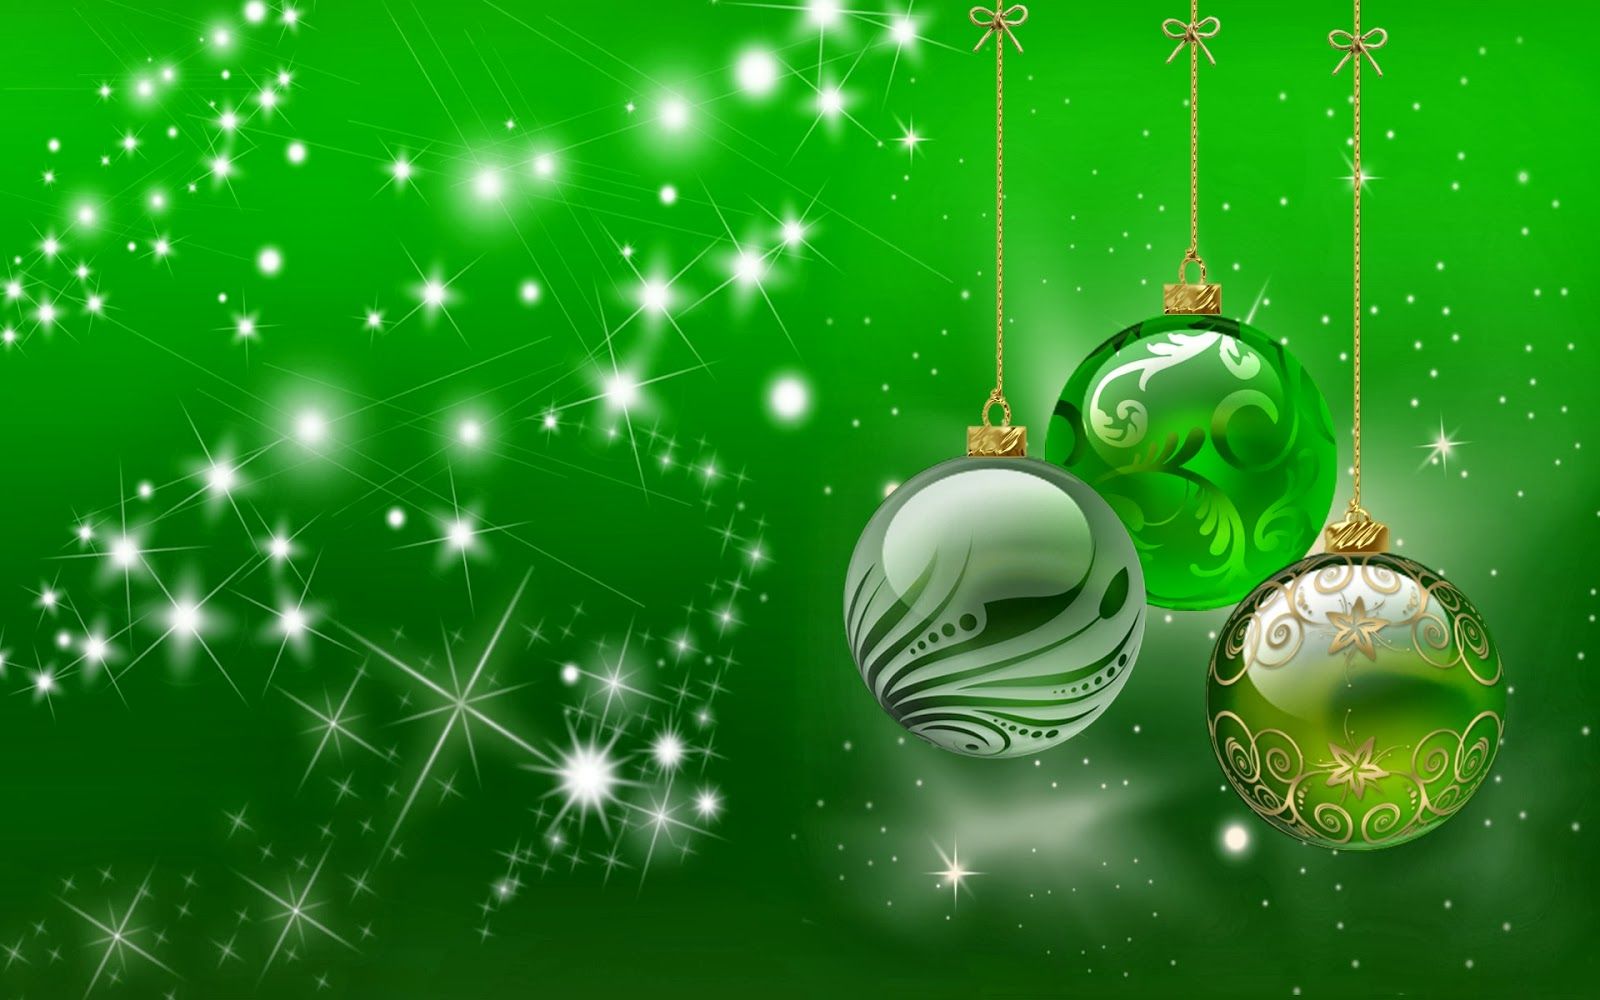 Green Christmas Background HD Wallpaper. All Wallpaper Gallery. Christmas wallpaper background, Christmas image, Christmas background